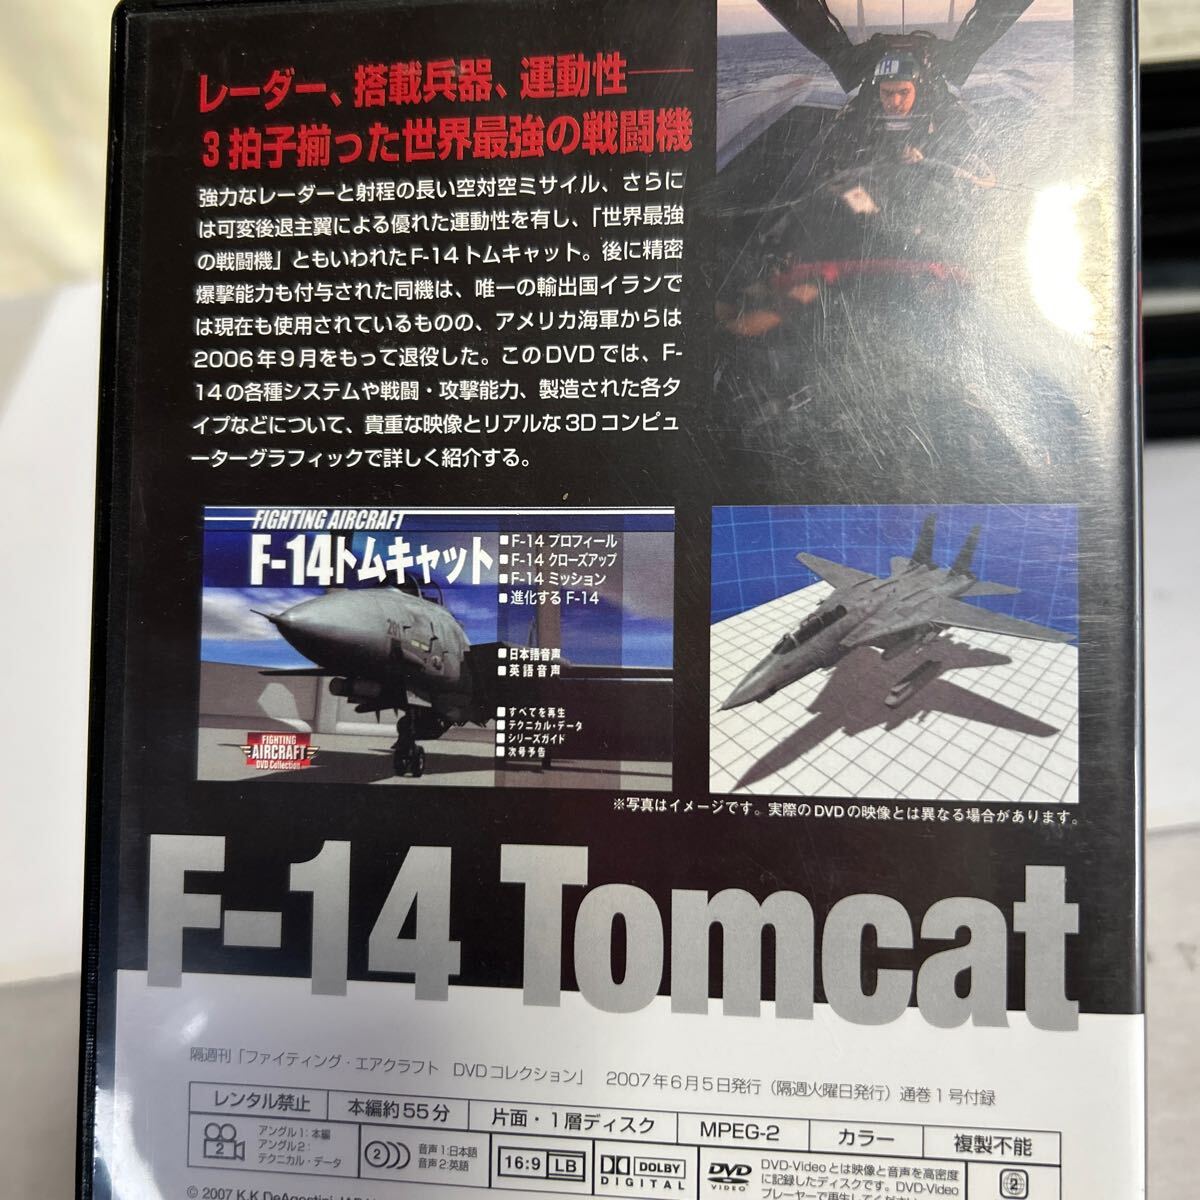  total 17 sheets fighter (aircraft) don't fit der Goss tea ni fighting * air craft DVD collection F-14 euro Fighter to-ne-do[KMDV-032913]